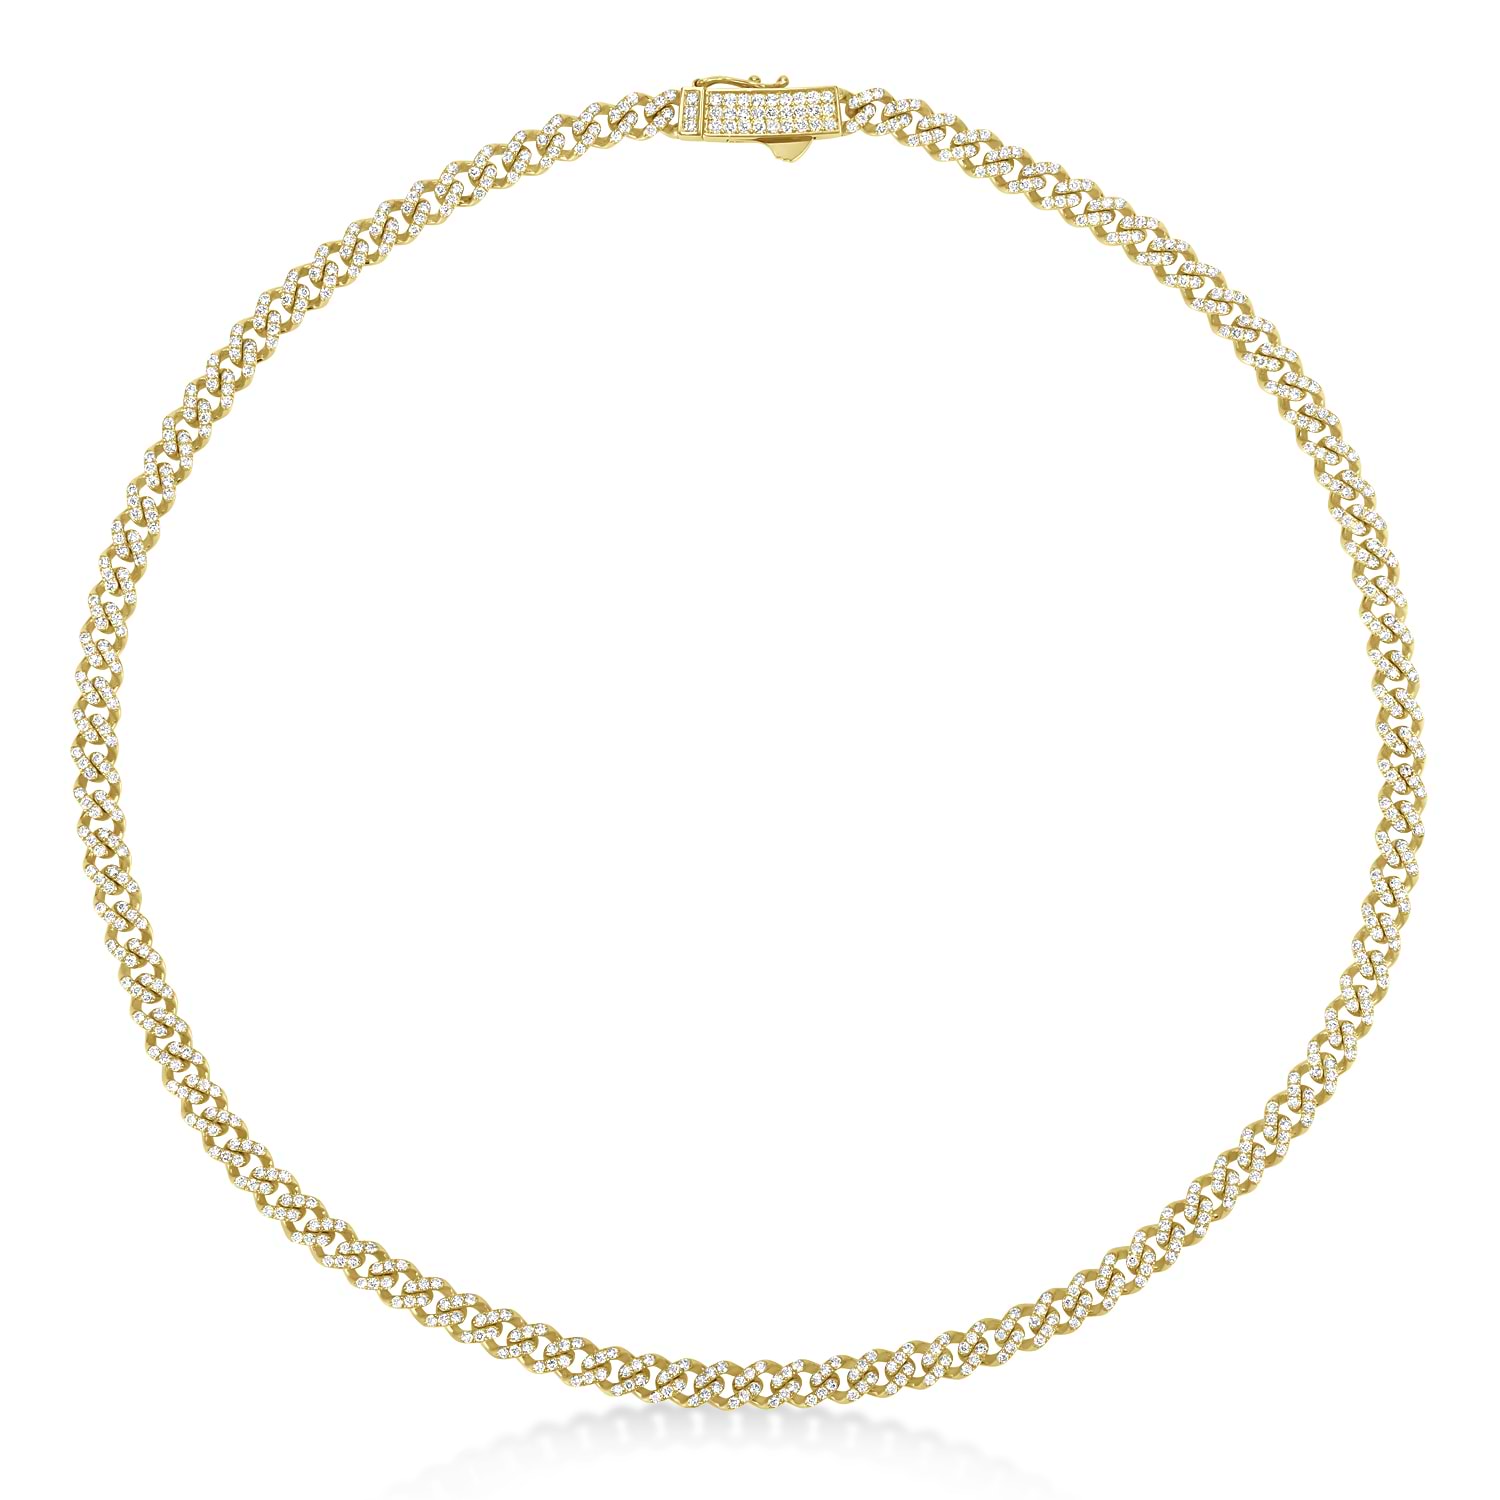 Diamond Link Chain Necklace 14k Yellow Gold (6.24ct)